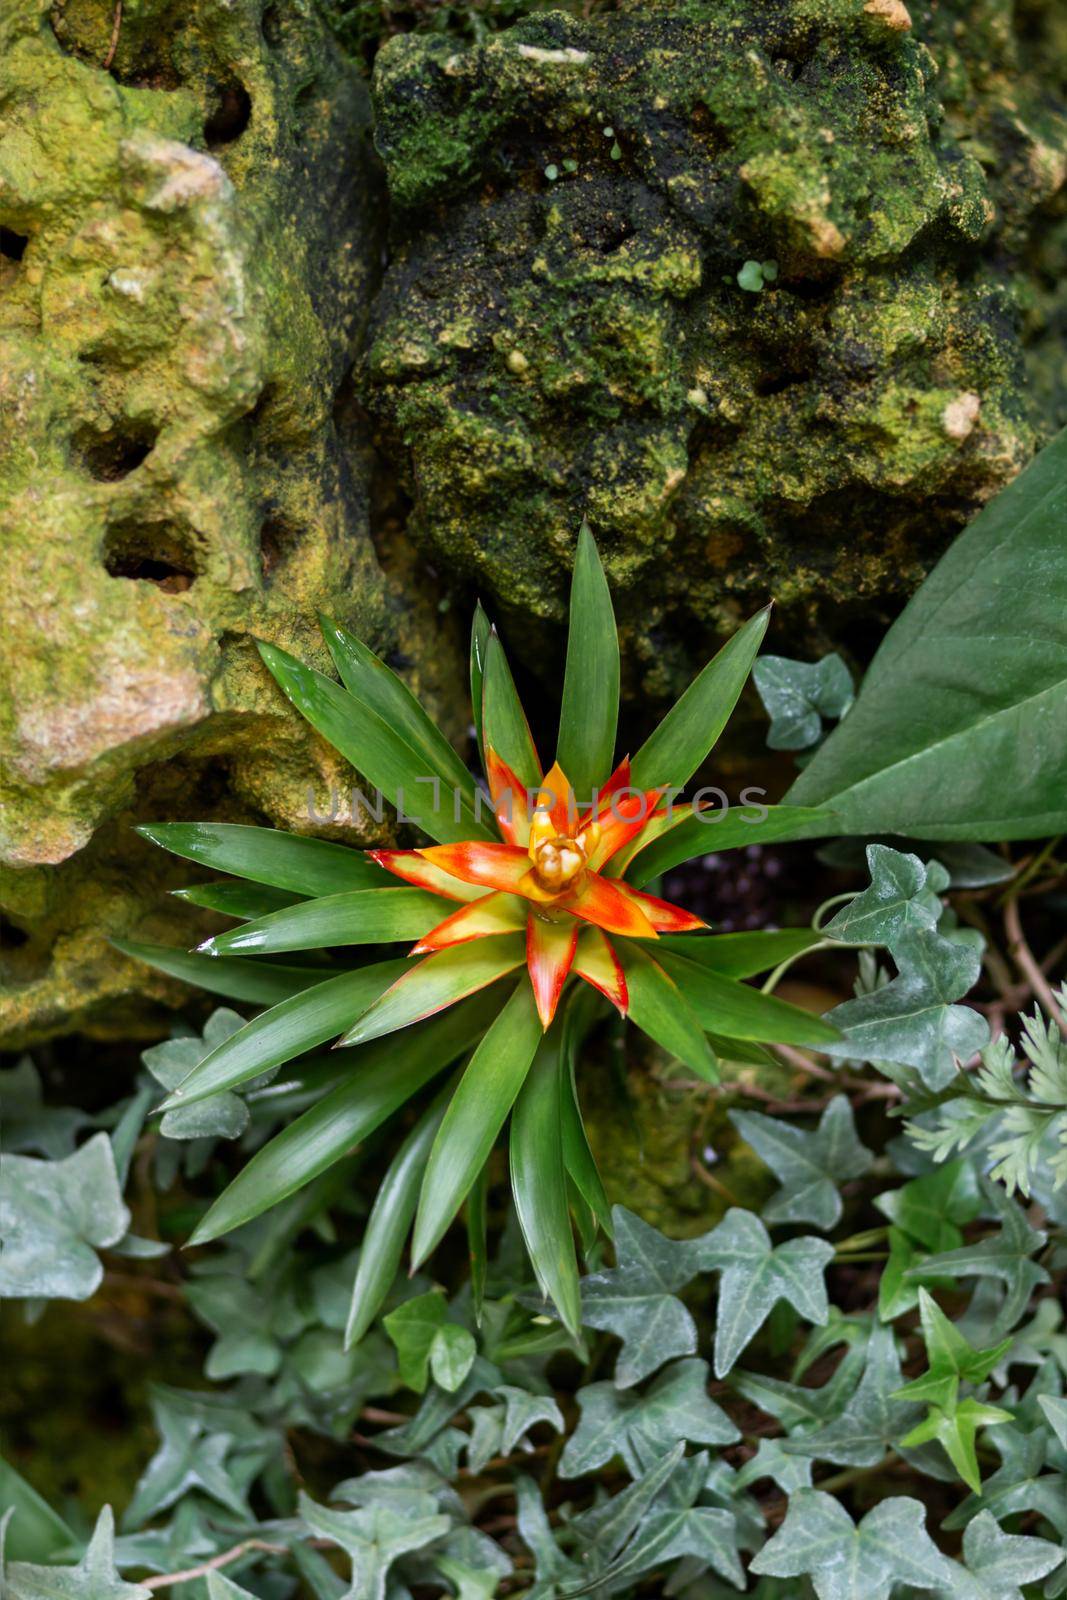 Guzmania or tufted airplant. Bright and colorful flower in bloom.